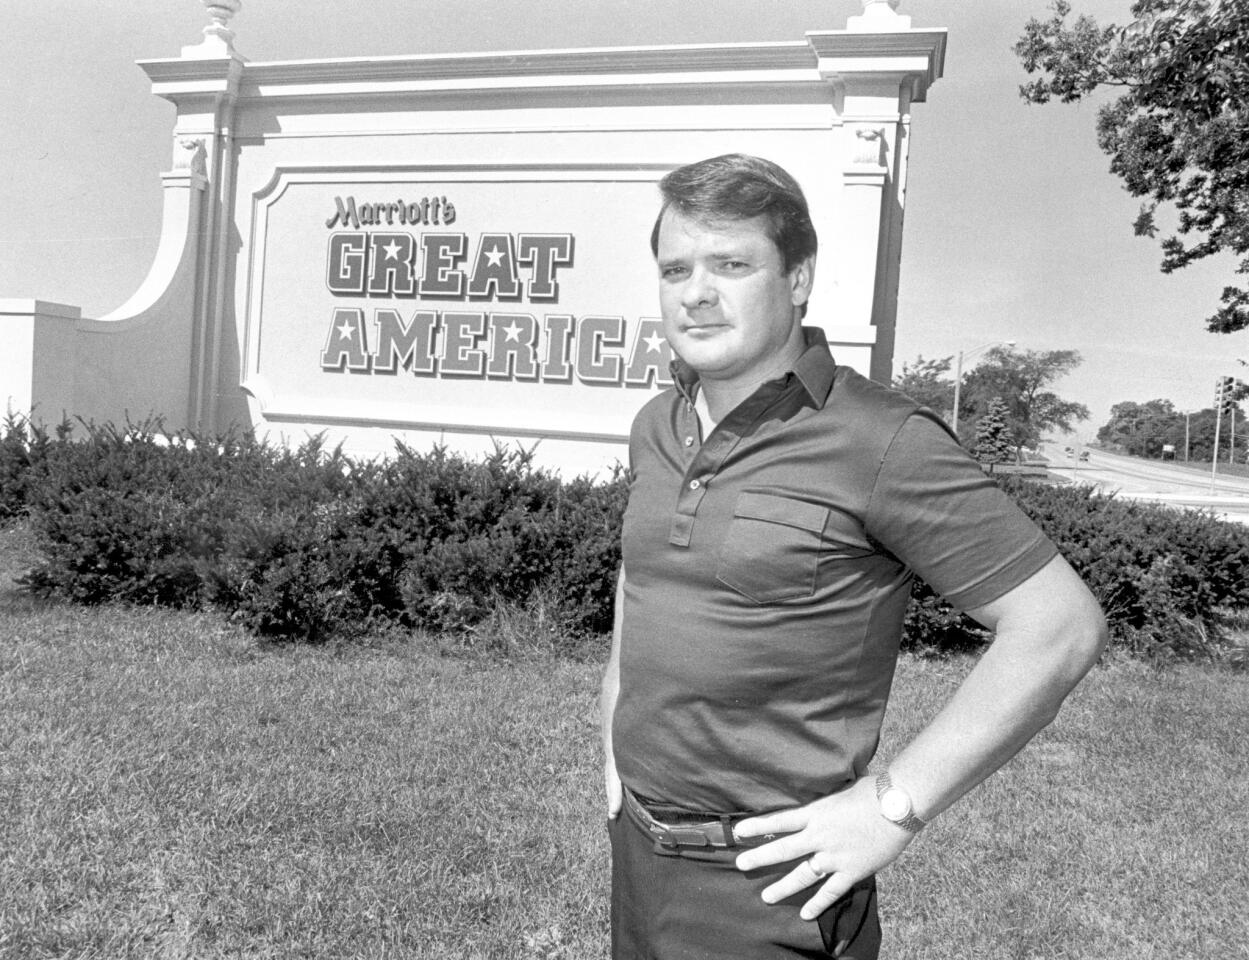 Richard Welton, shown in 1983, played a key role in the opening of Six Flags Great America in Gurnee. Welton, who served as mayor of Gurnee from 1973 to 2001, died July 31 at 72. Read the obituary.